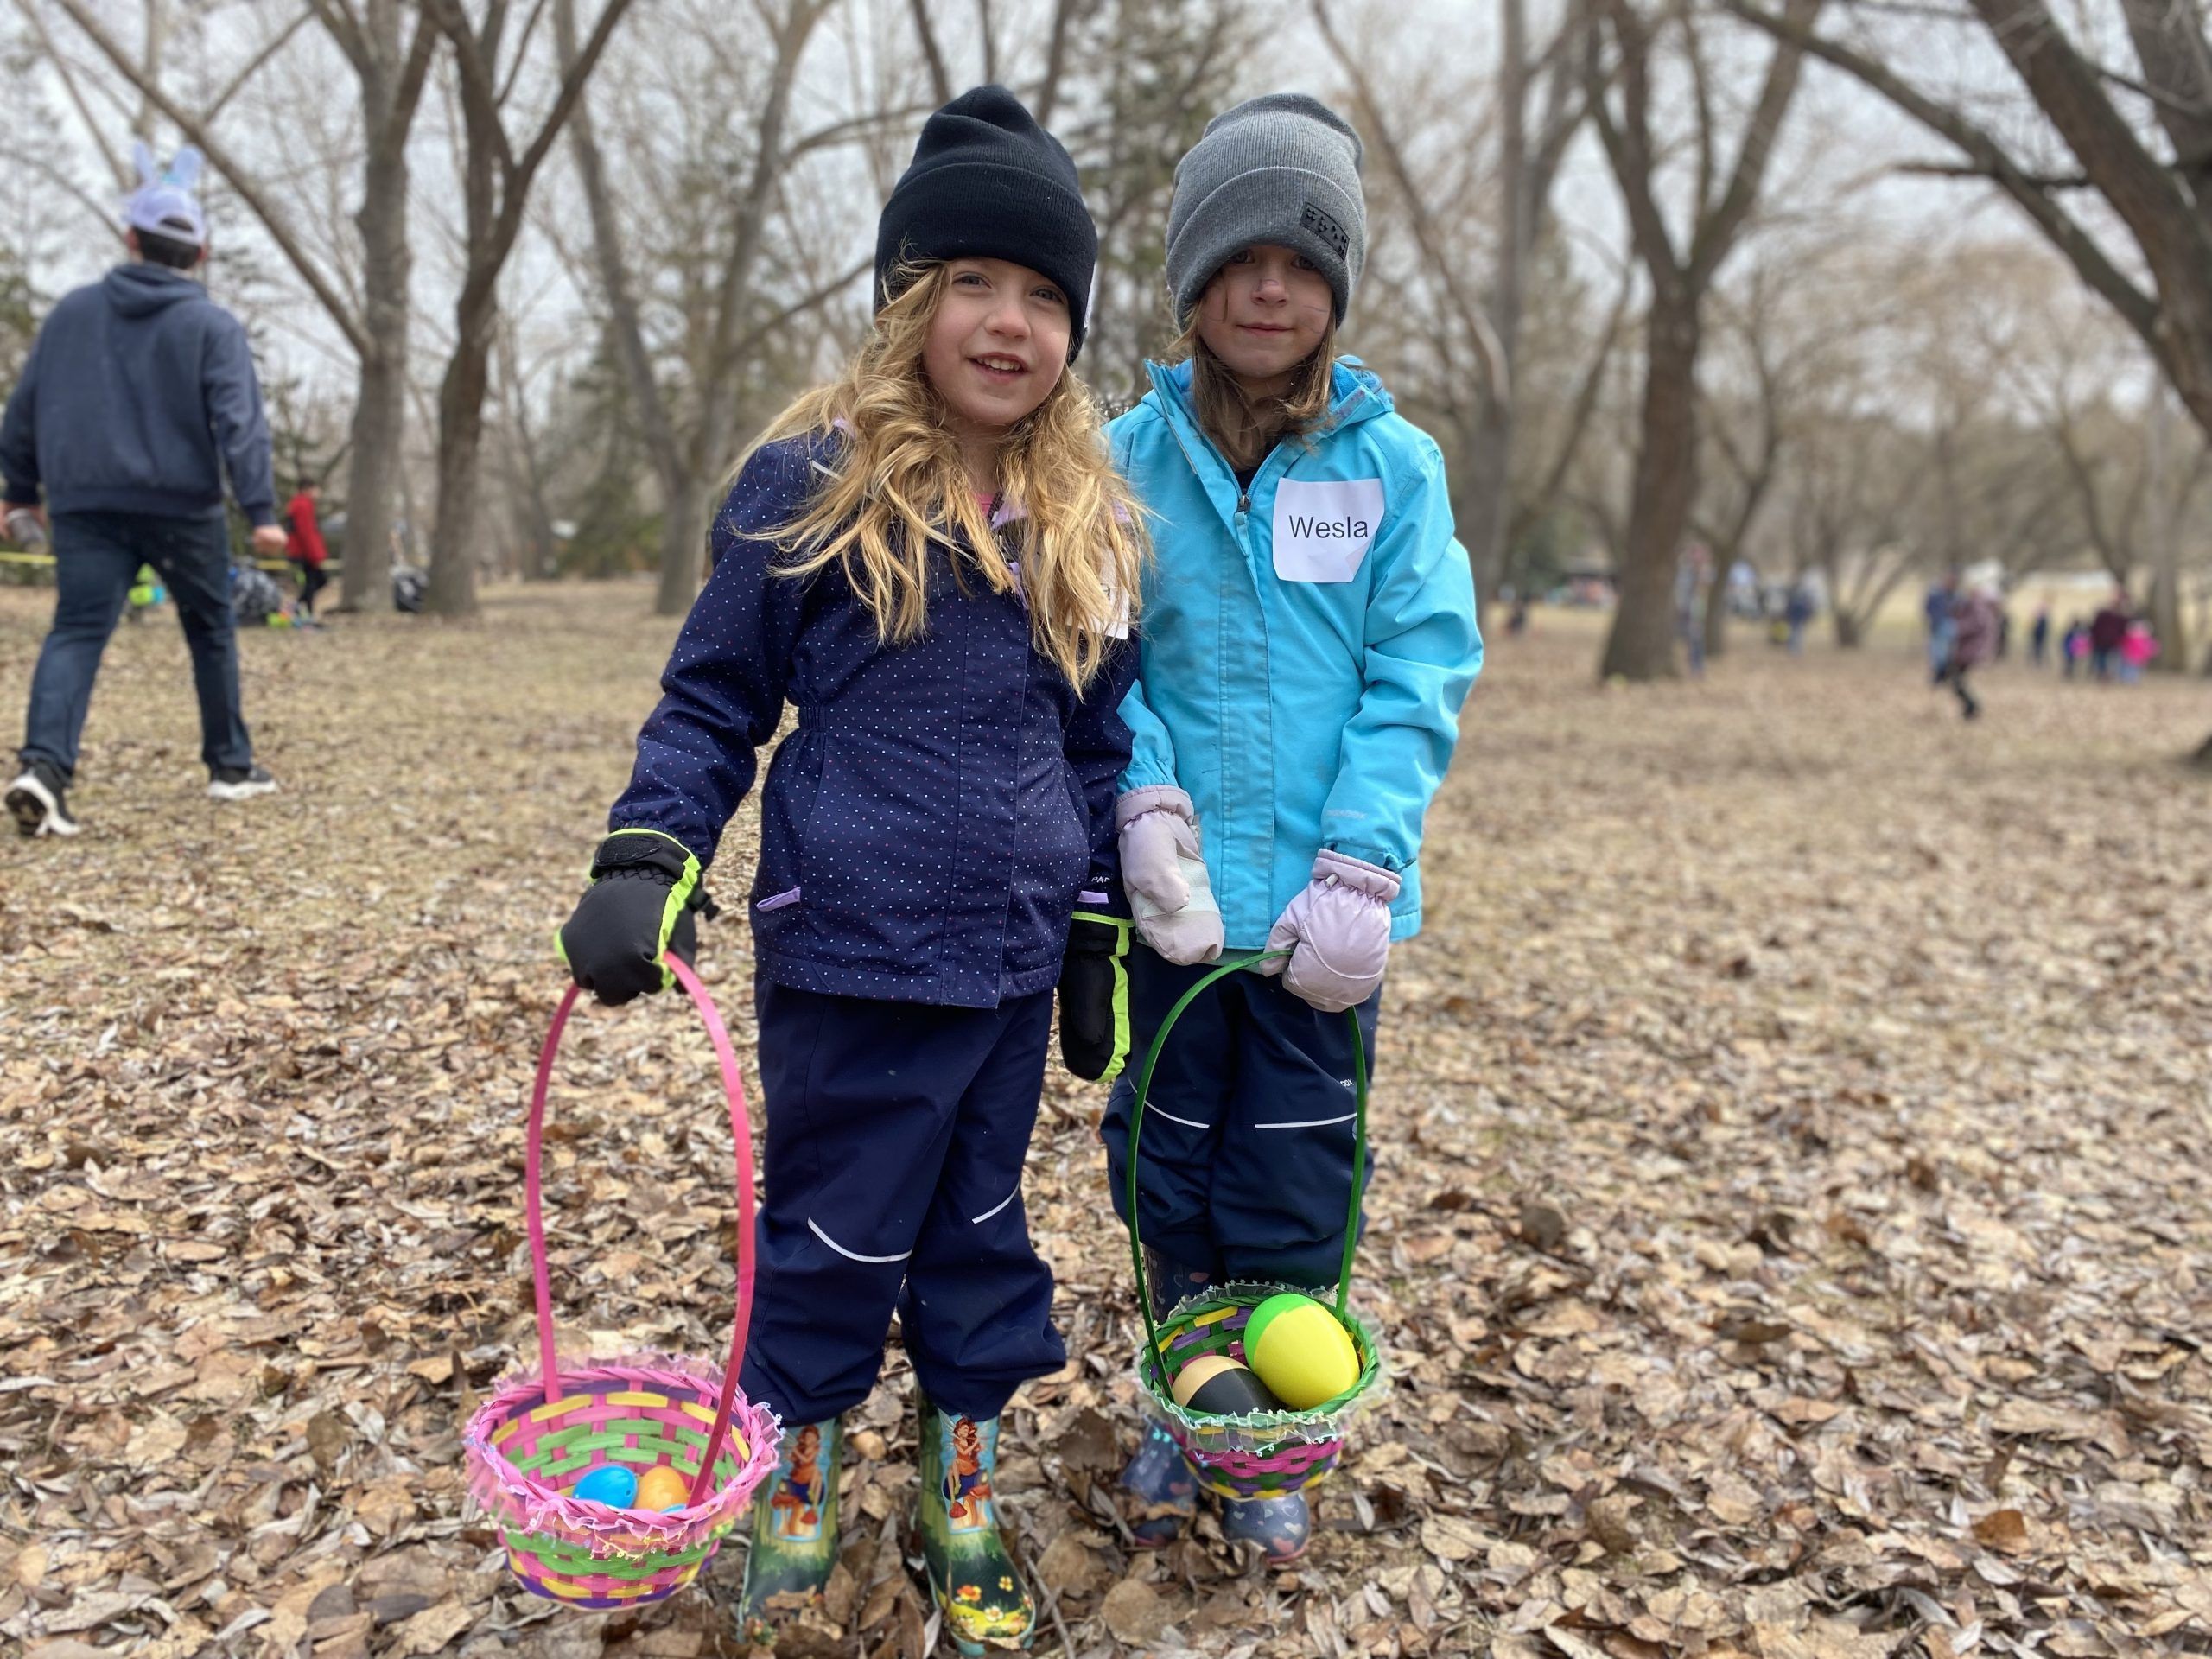 From left, Tarina Harasymchuk 4, and her sister Wesla, 6, participated in a "beeping" Easter egg hunt for children with vision loss in Emily Murphy Park on April 16, 2022.